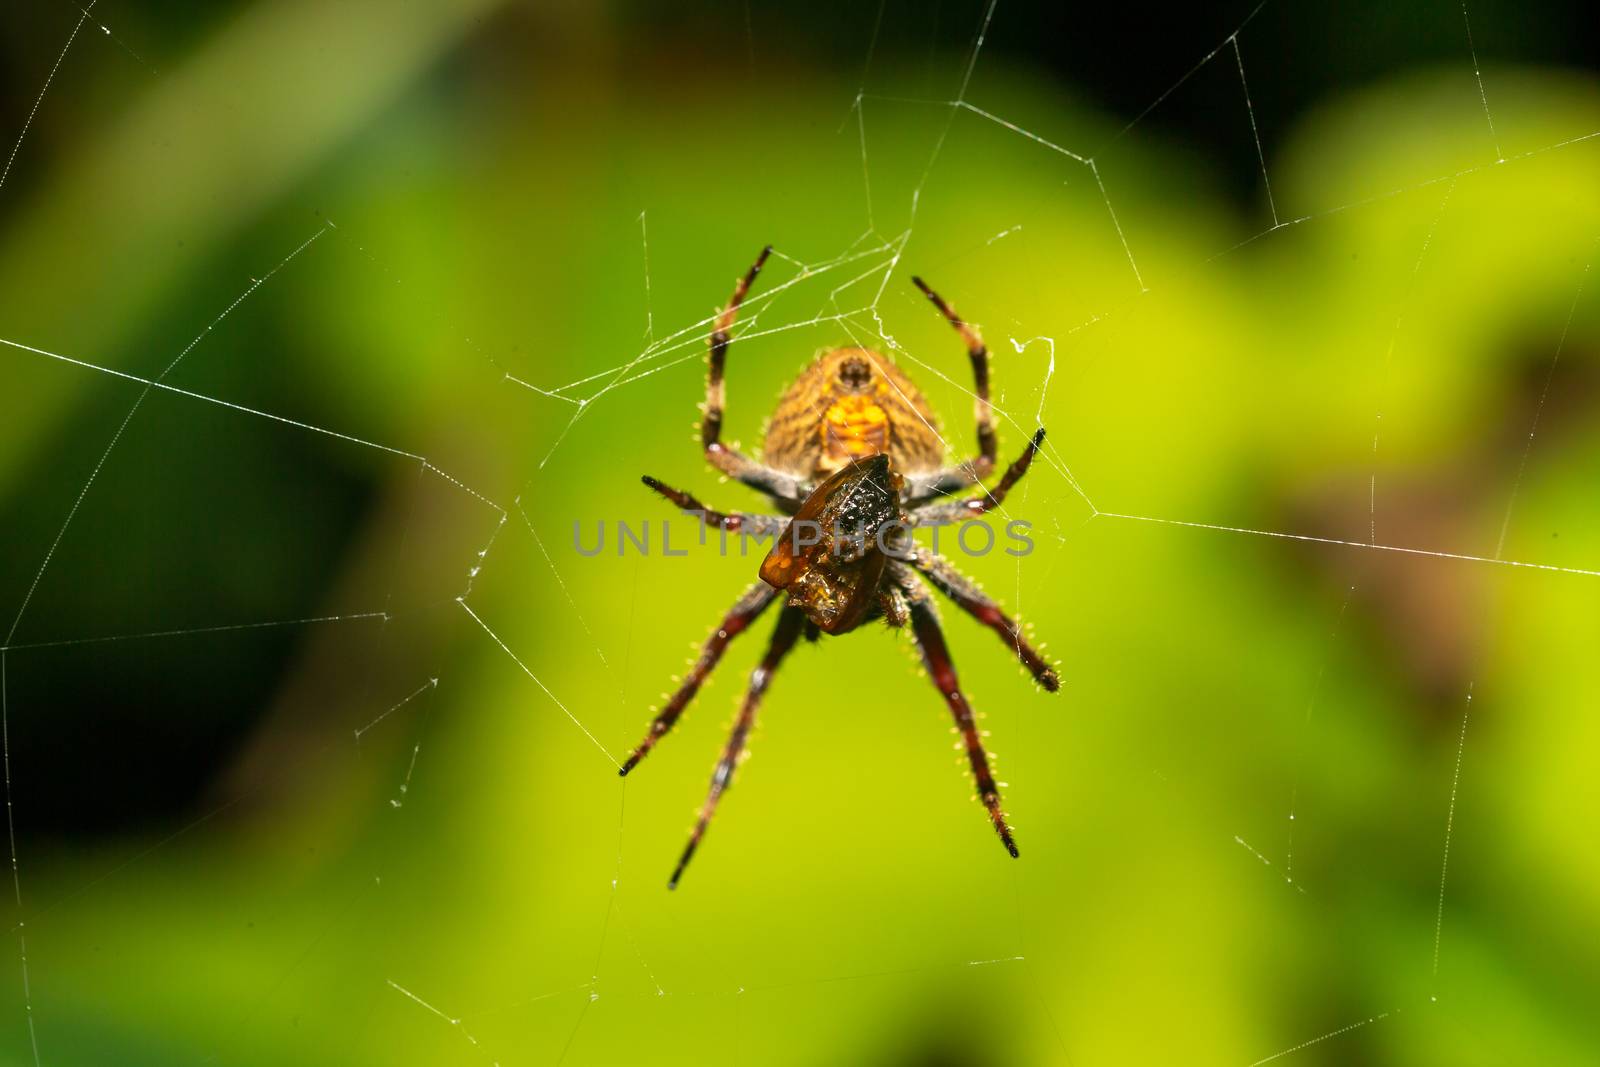 A spider in its web in the rainforest by 25ehaag6